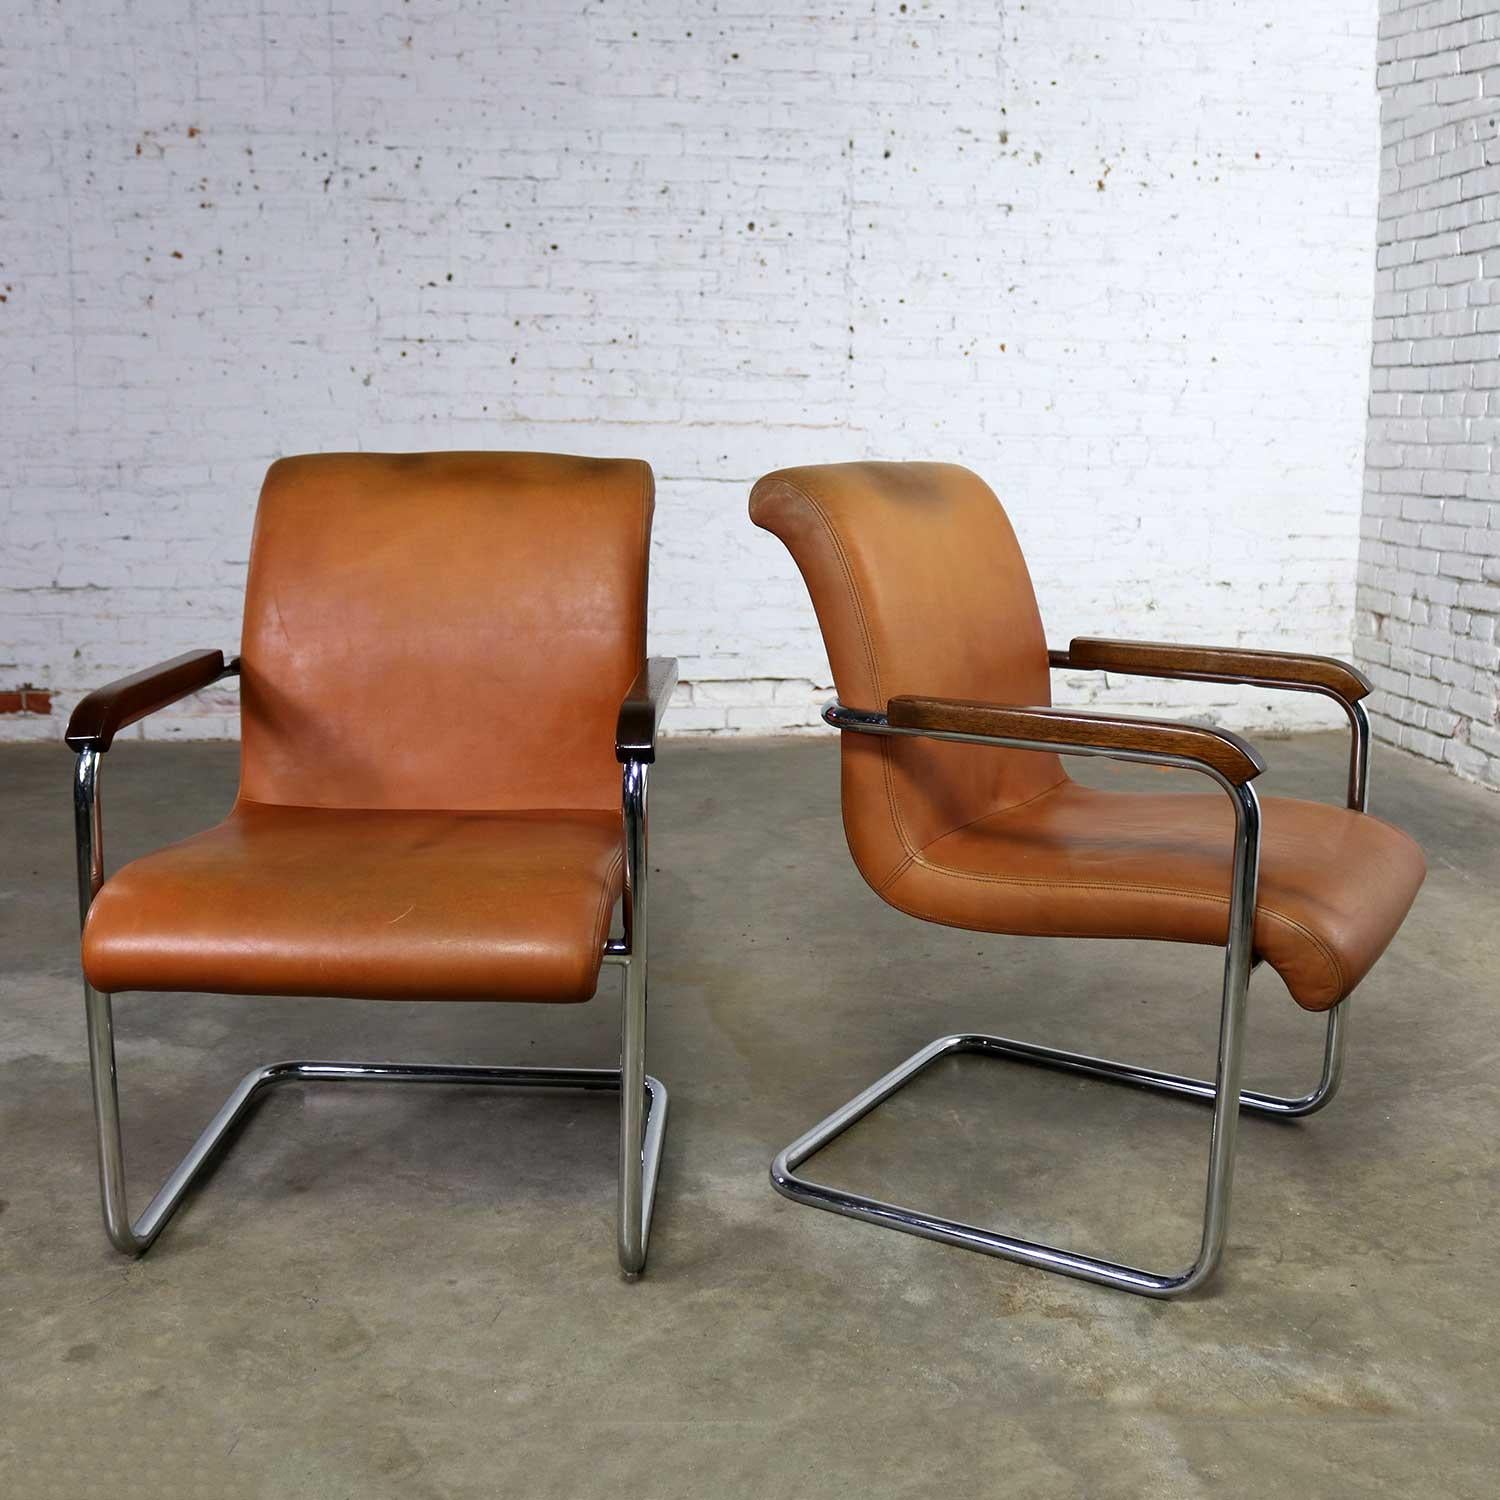 Cantilevered Chrome Cognac Leather Chairs Mid-Century Modern In Good Condition In Topeka, KS